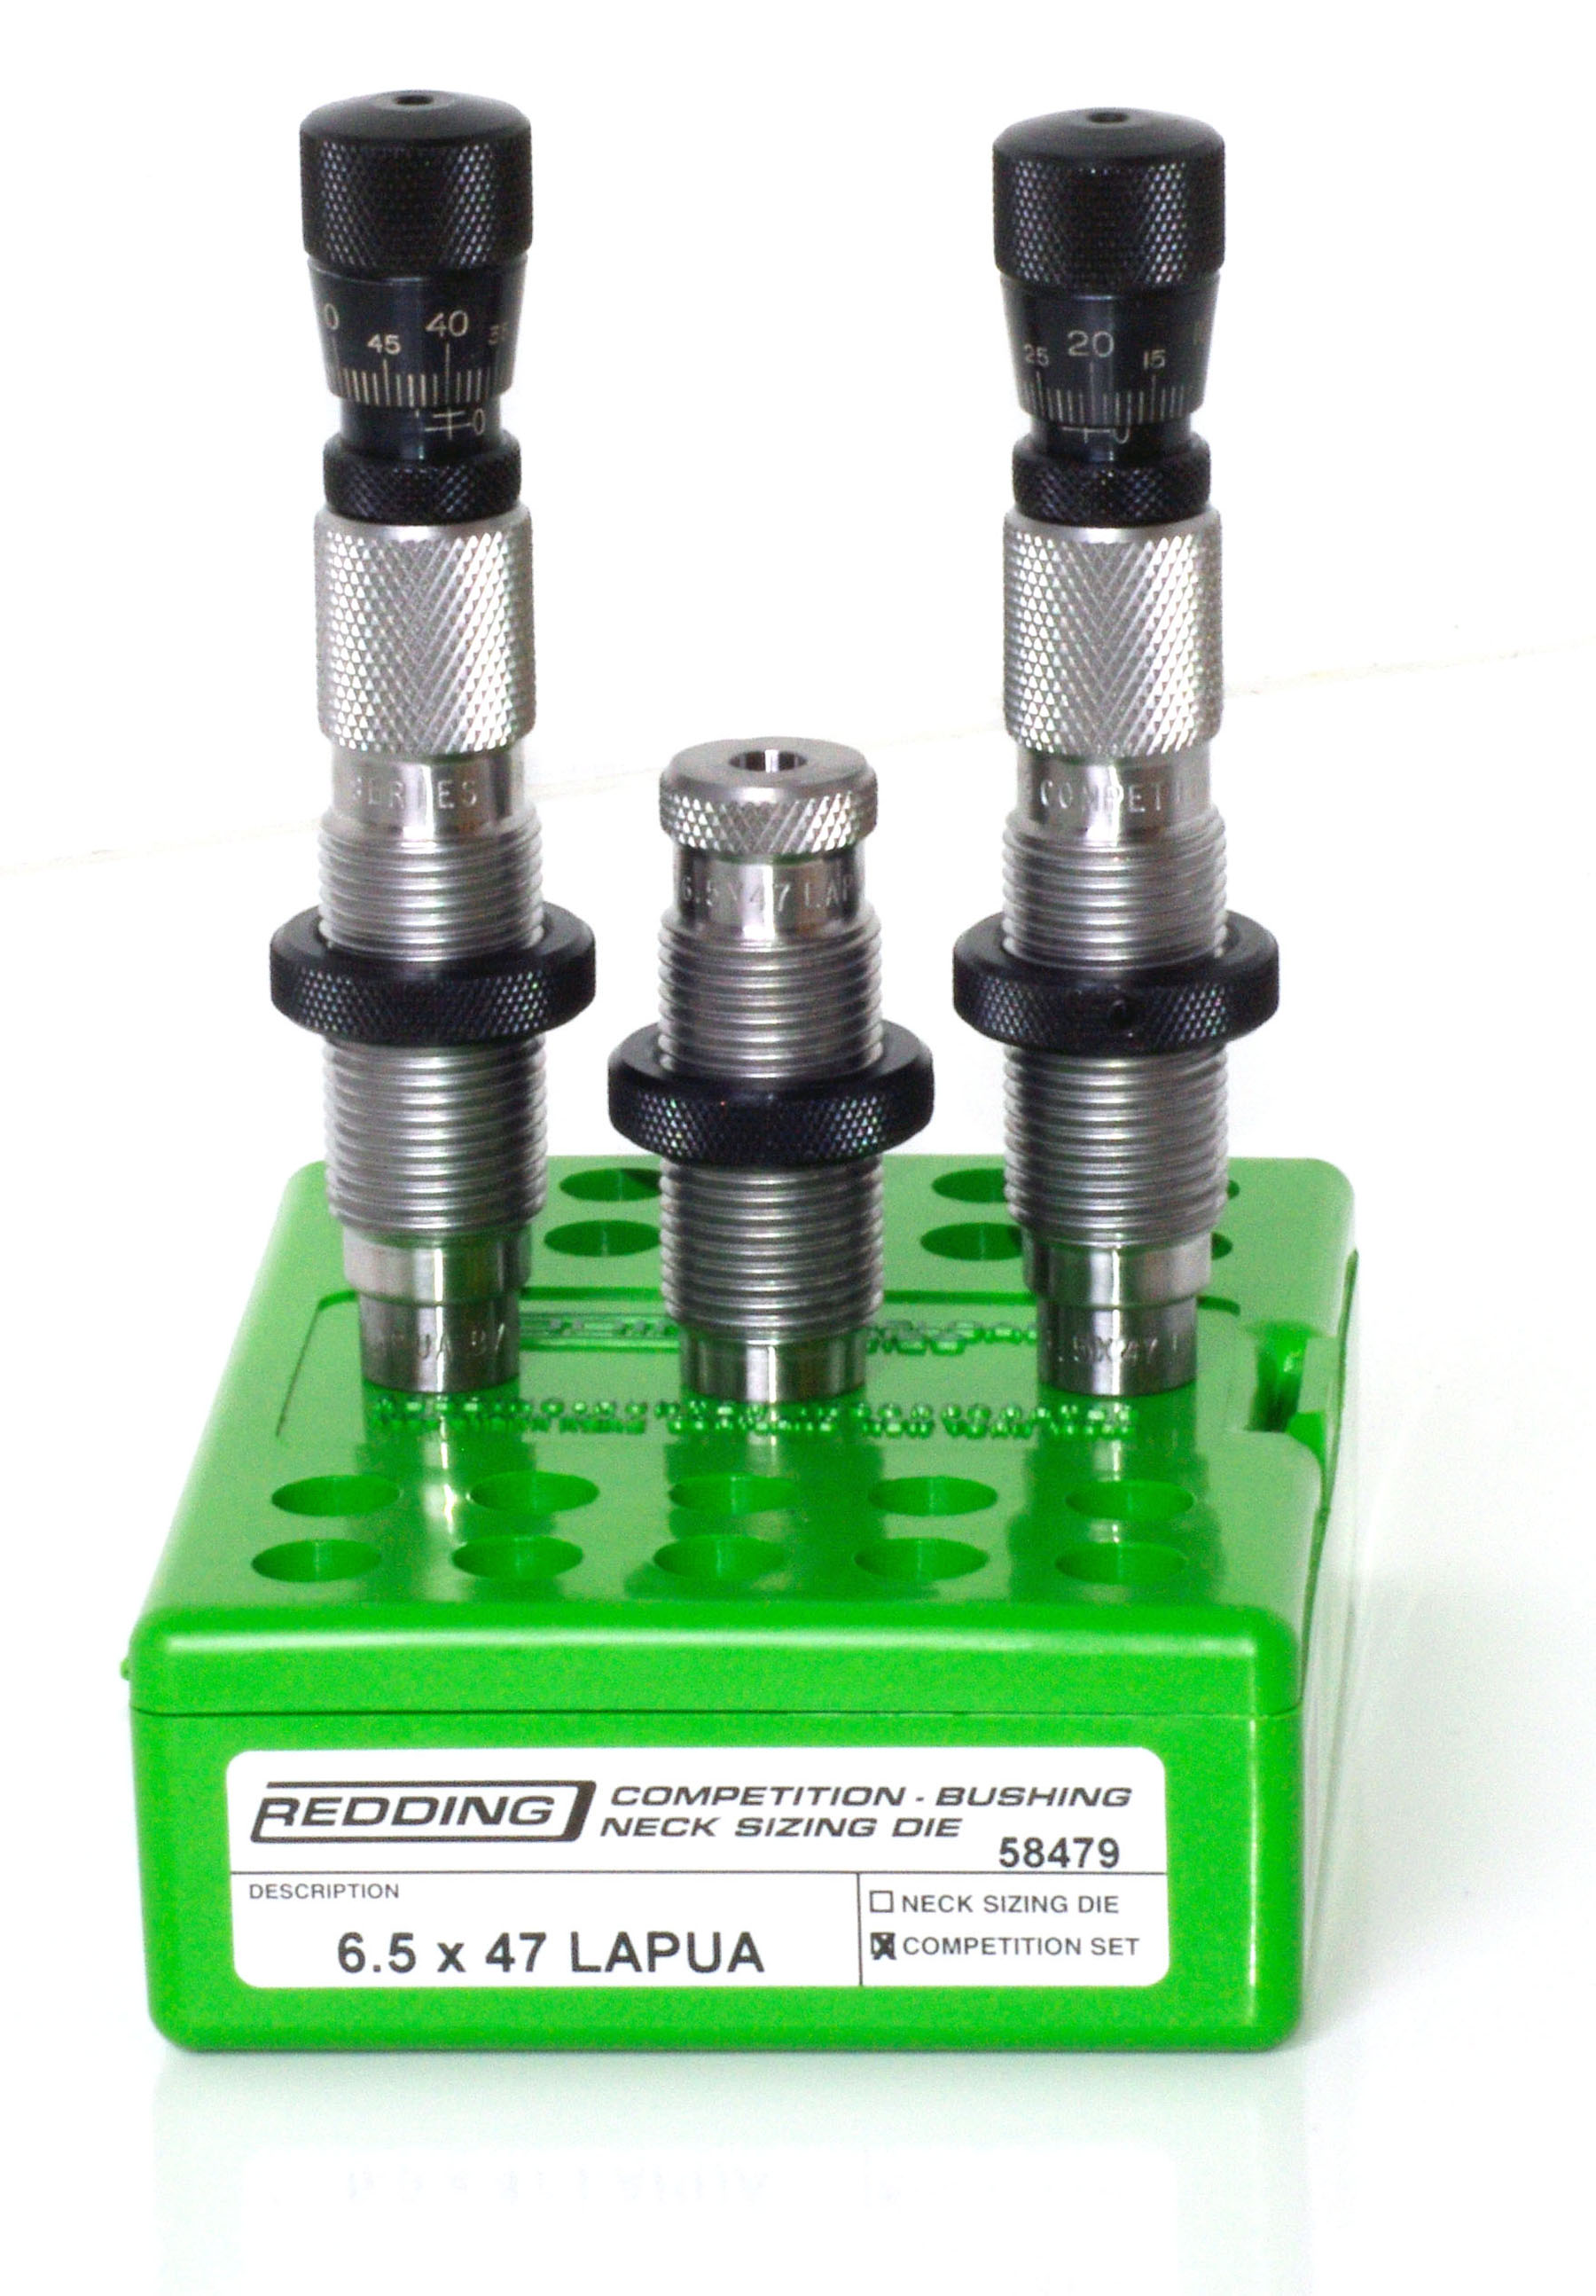 Redding Reloading Type S-Match Neck Die Set Up to 57% Off w/ Free Shipping